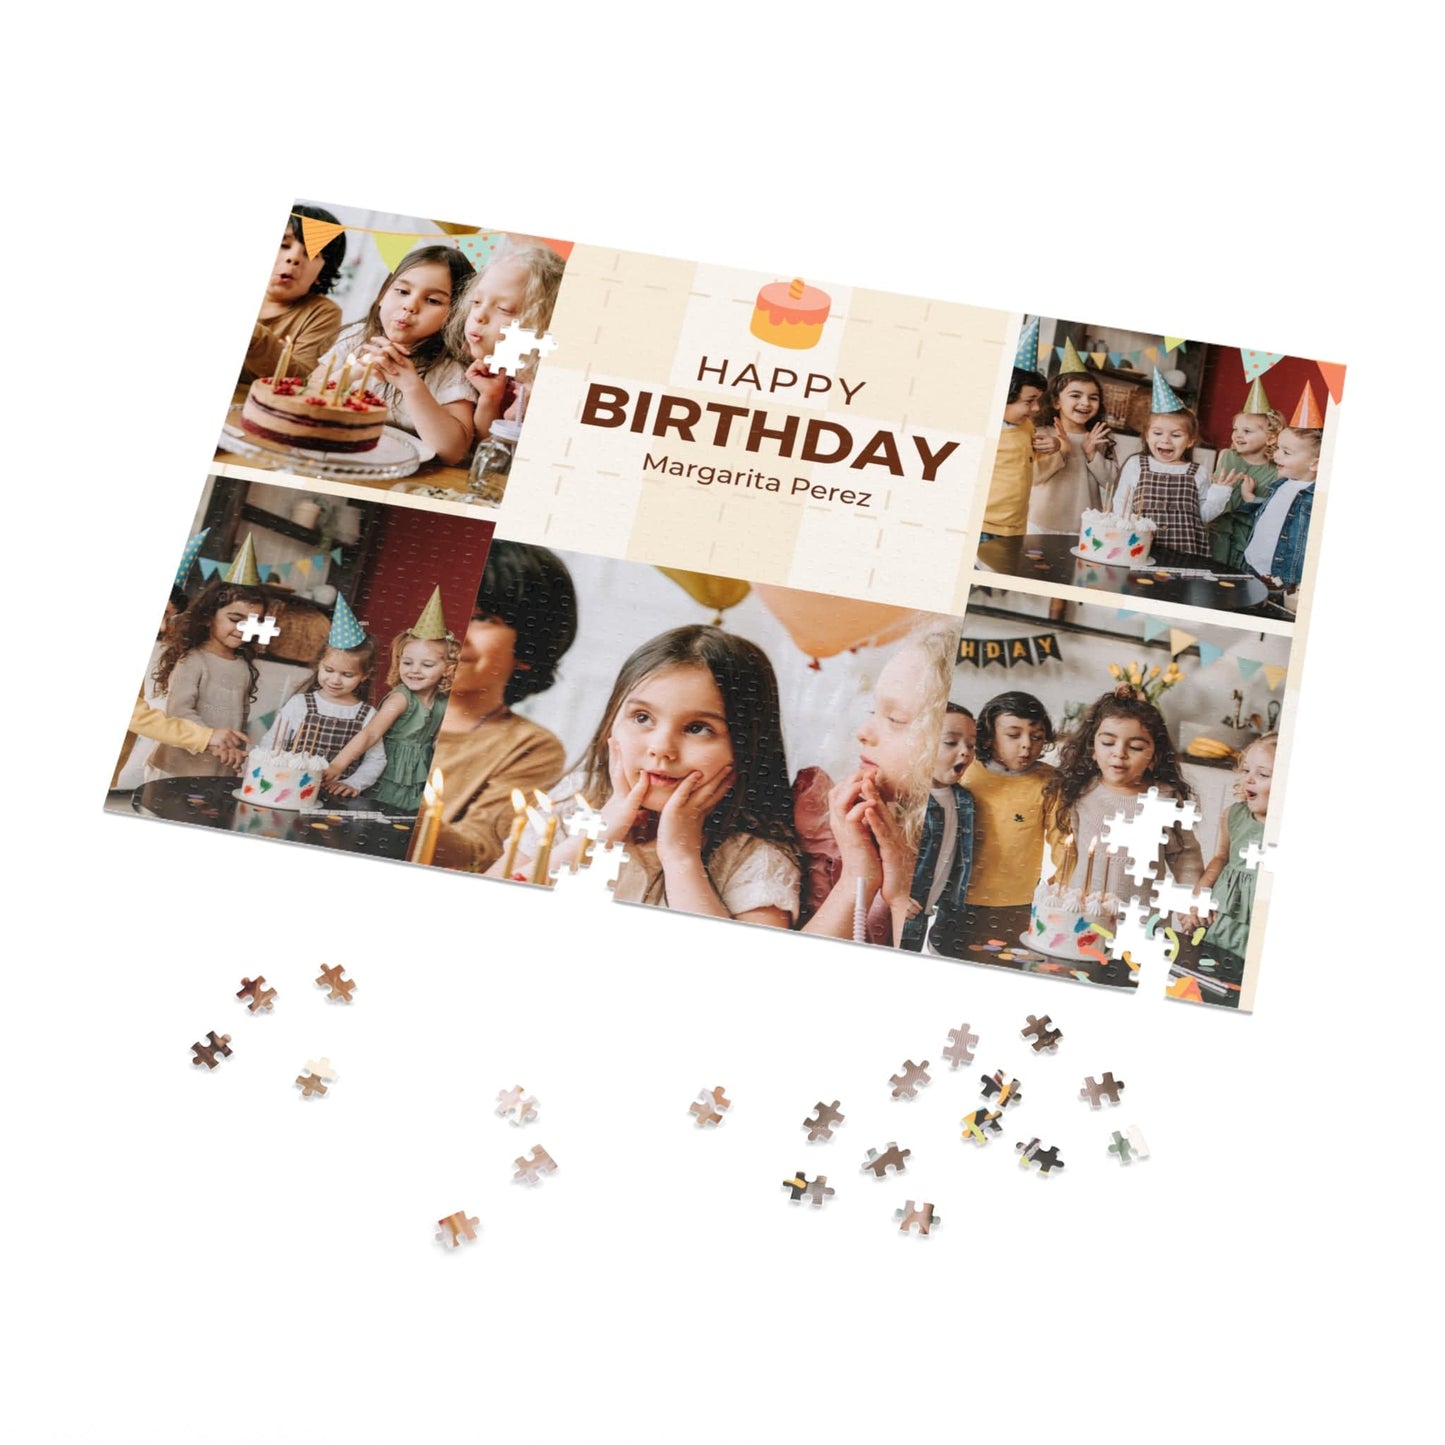 Custom Made Jigsaw Puzzle for Birthday from Photos  - 1000/500/252/110 Pieces - Ideal Birthday Day Gift for Parents